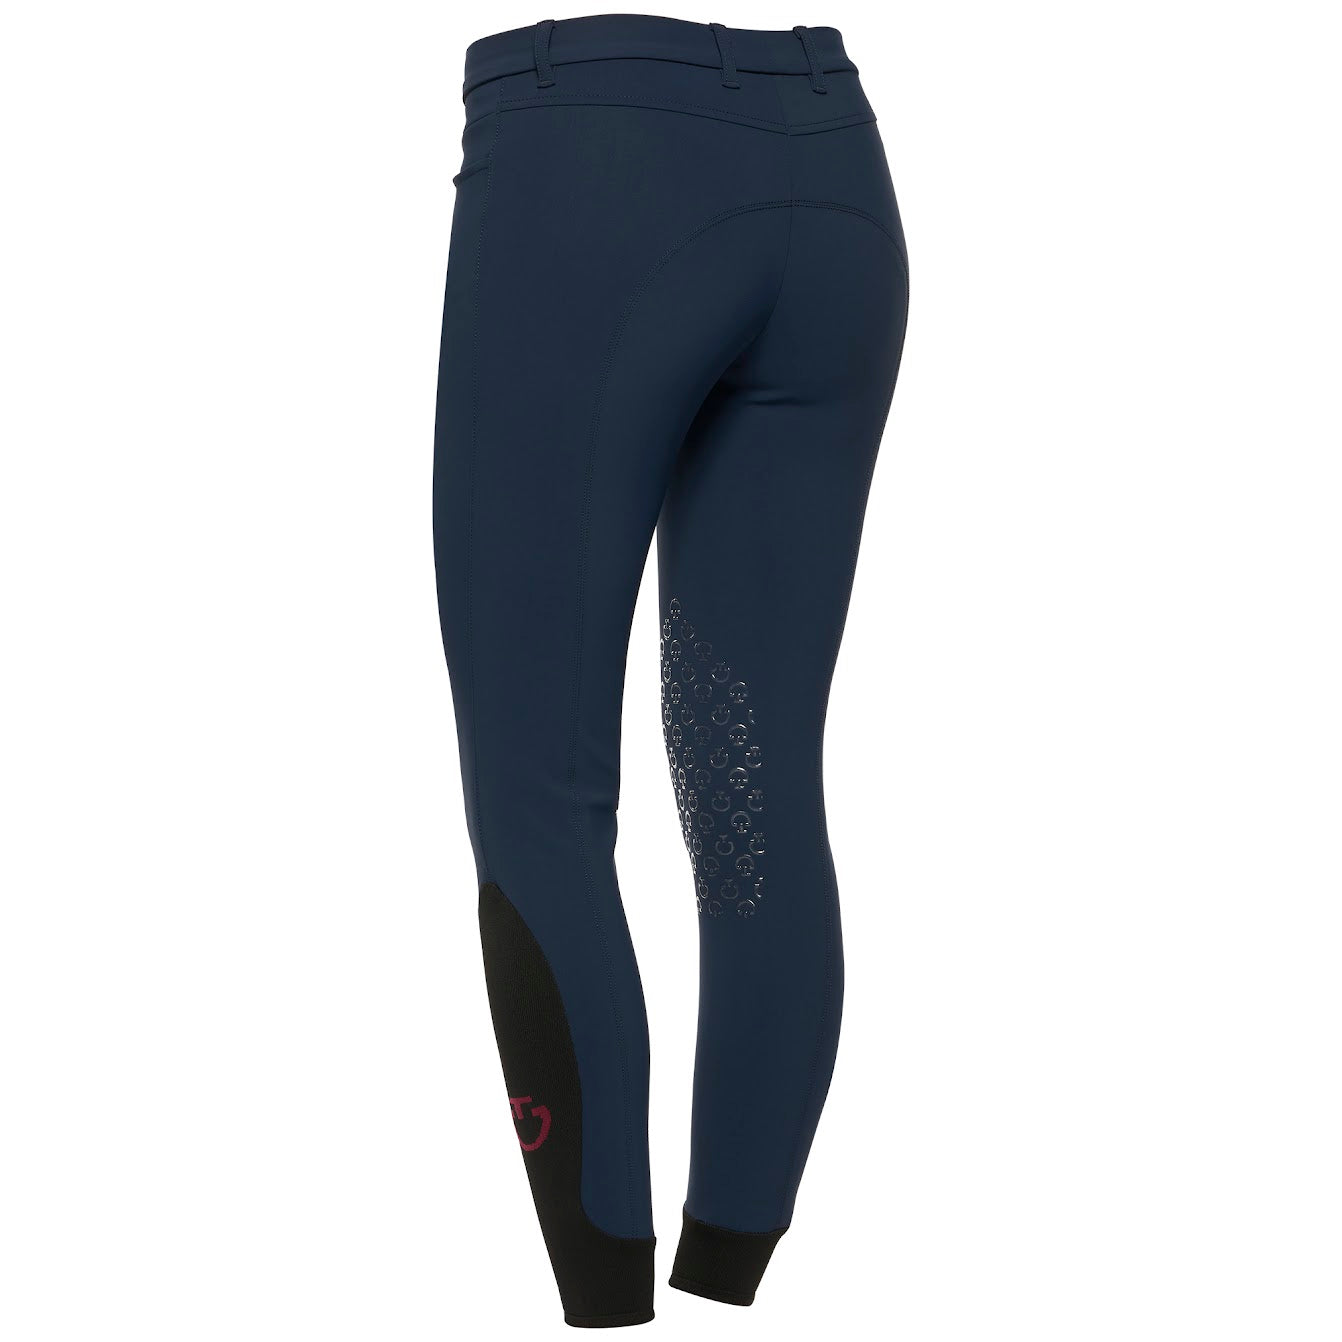 Cavalleria Toscana new navy System Grip breeches are made from a technical four-way stretch jersey fabric.   The fabric is also anti-UV, fast-drying and anti-bacterial, making the breeches ideal for the busy competition rider.